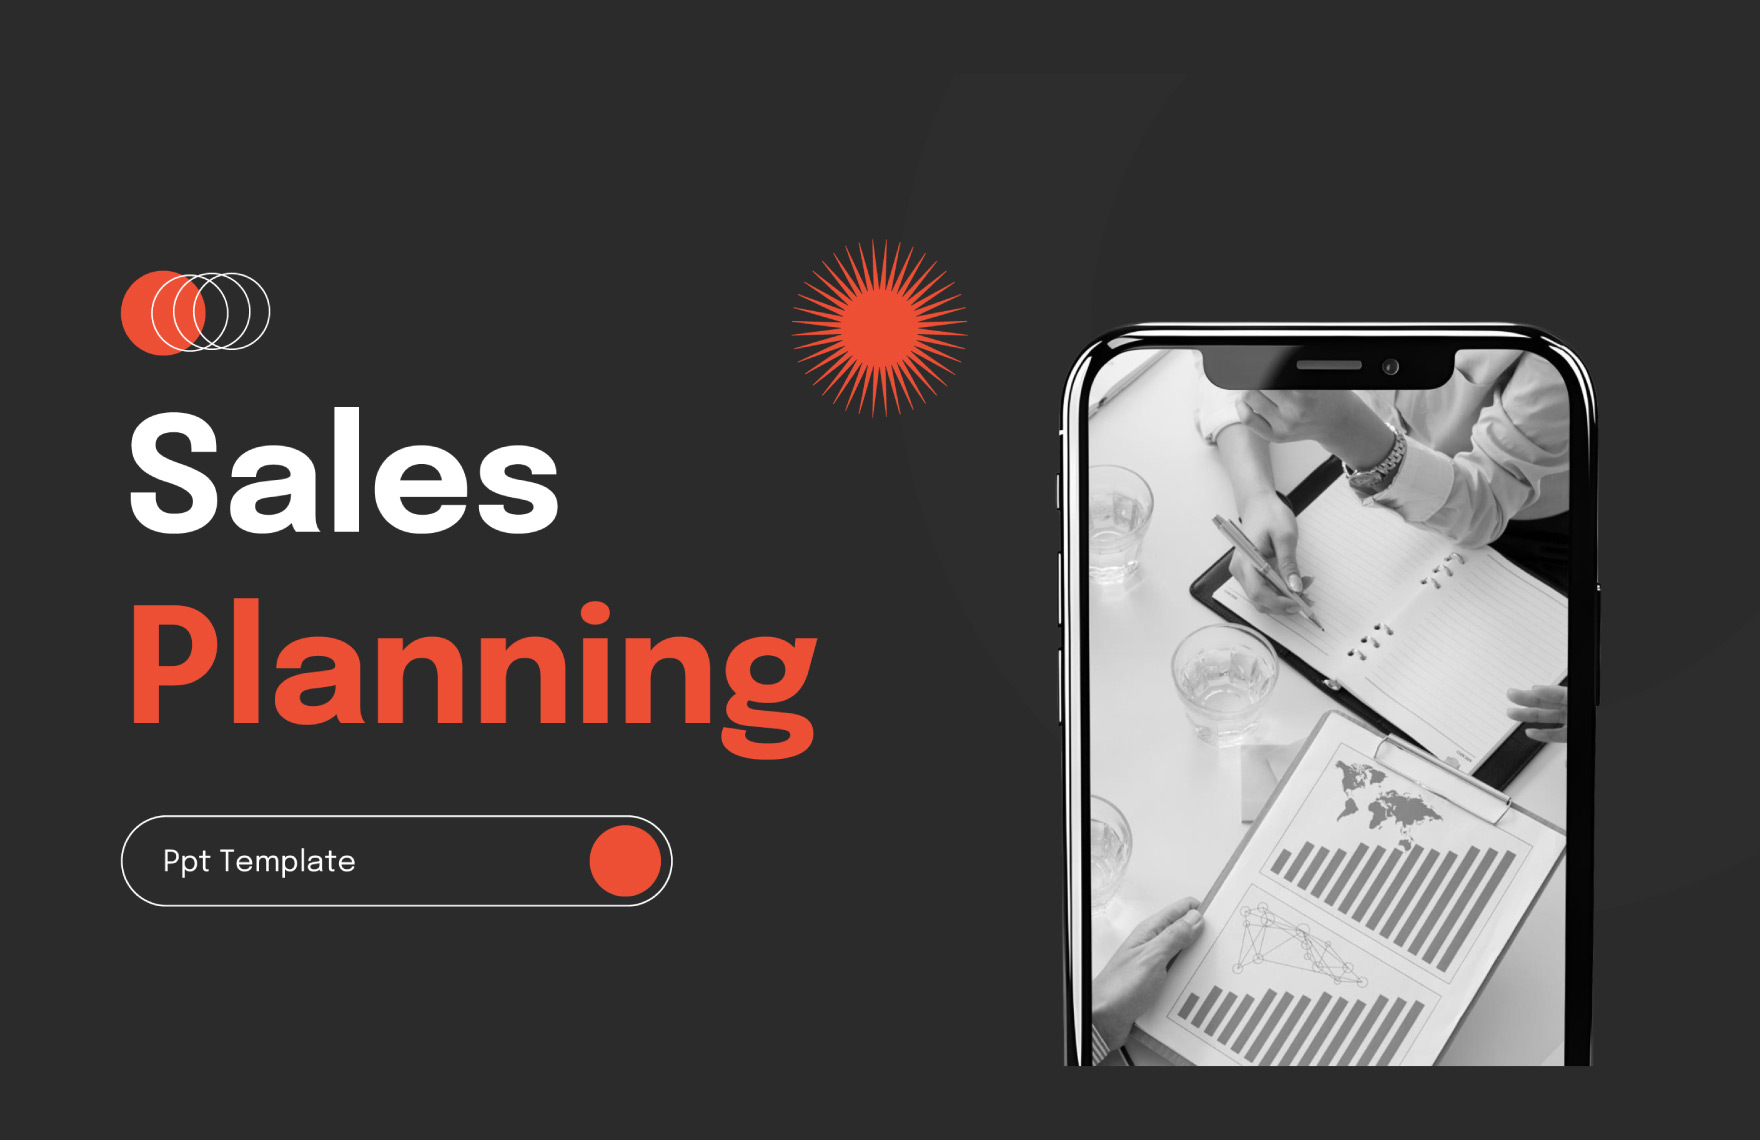 Sales Planning PPT Template